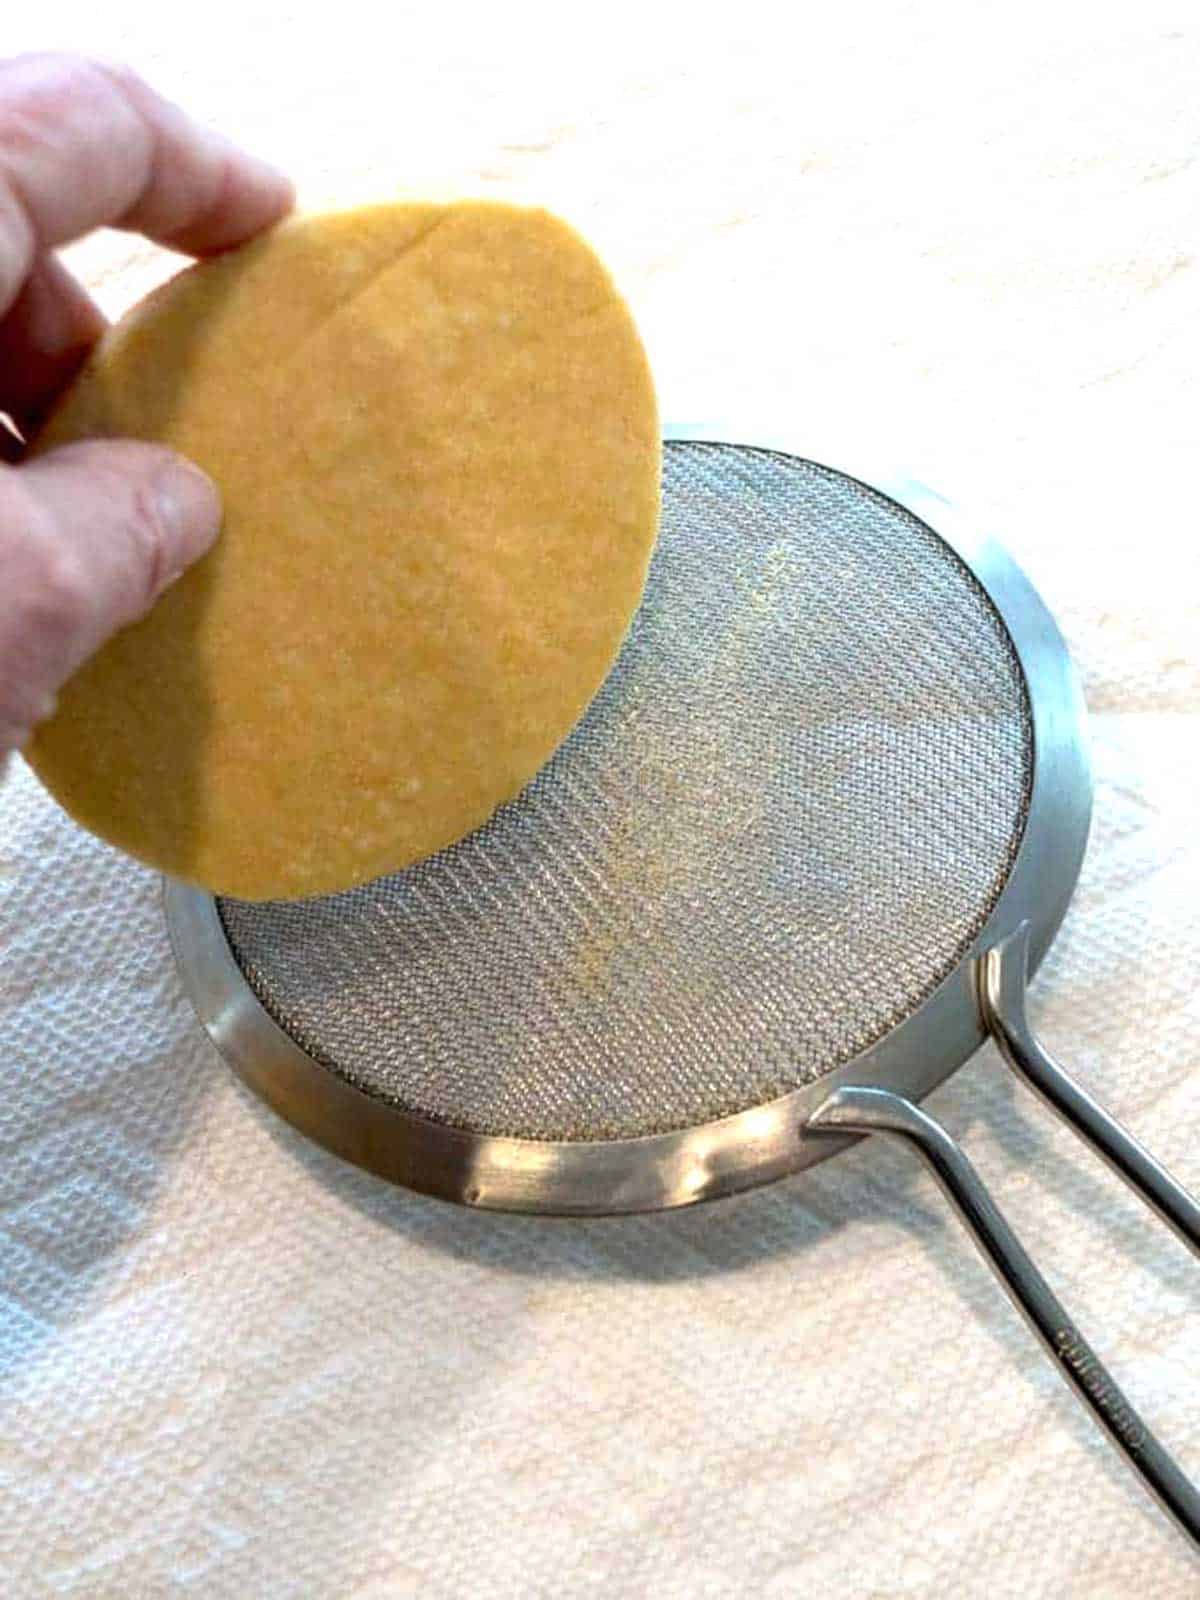 Smoothing the edges of the trimmed cookie.